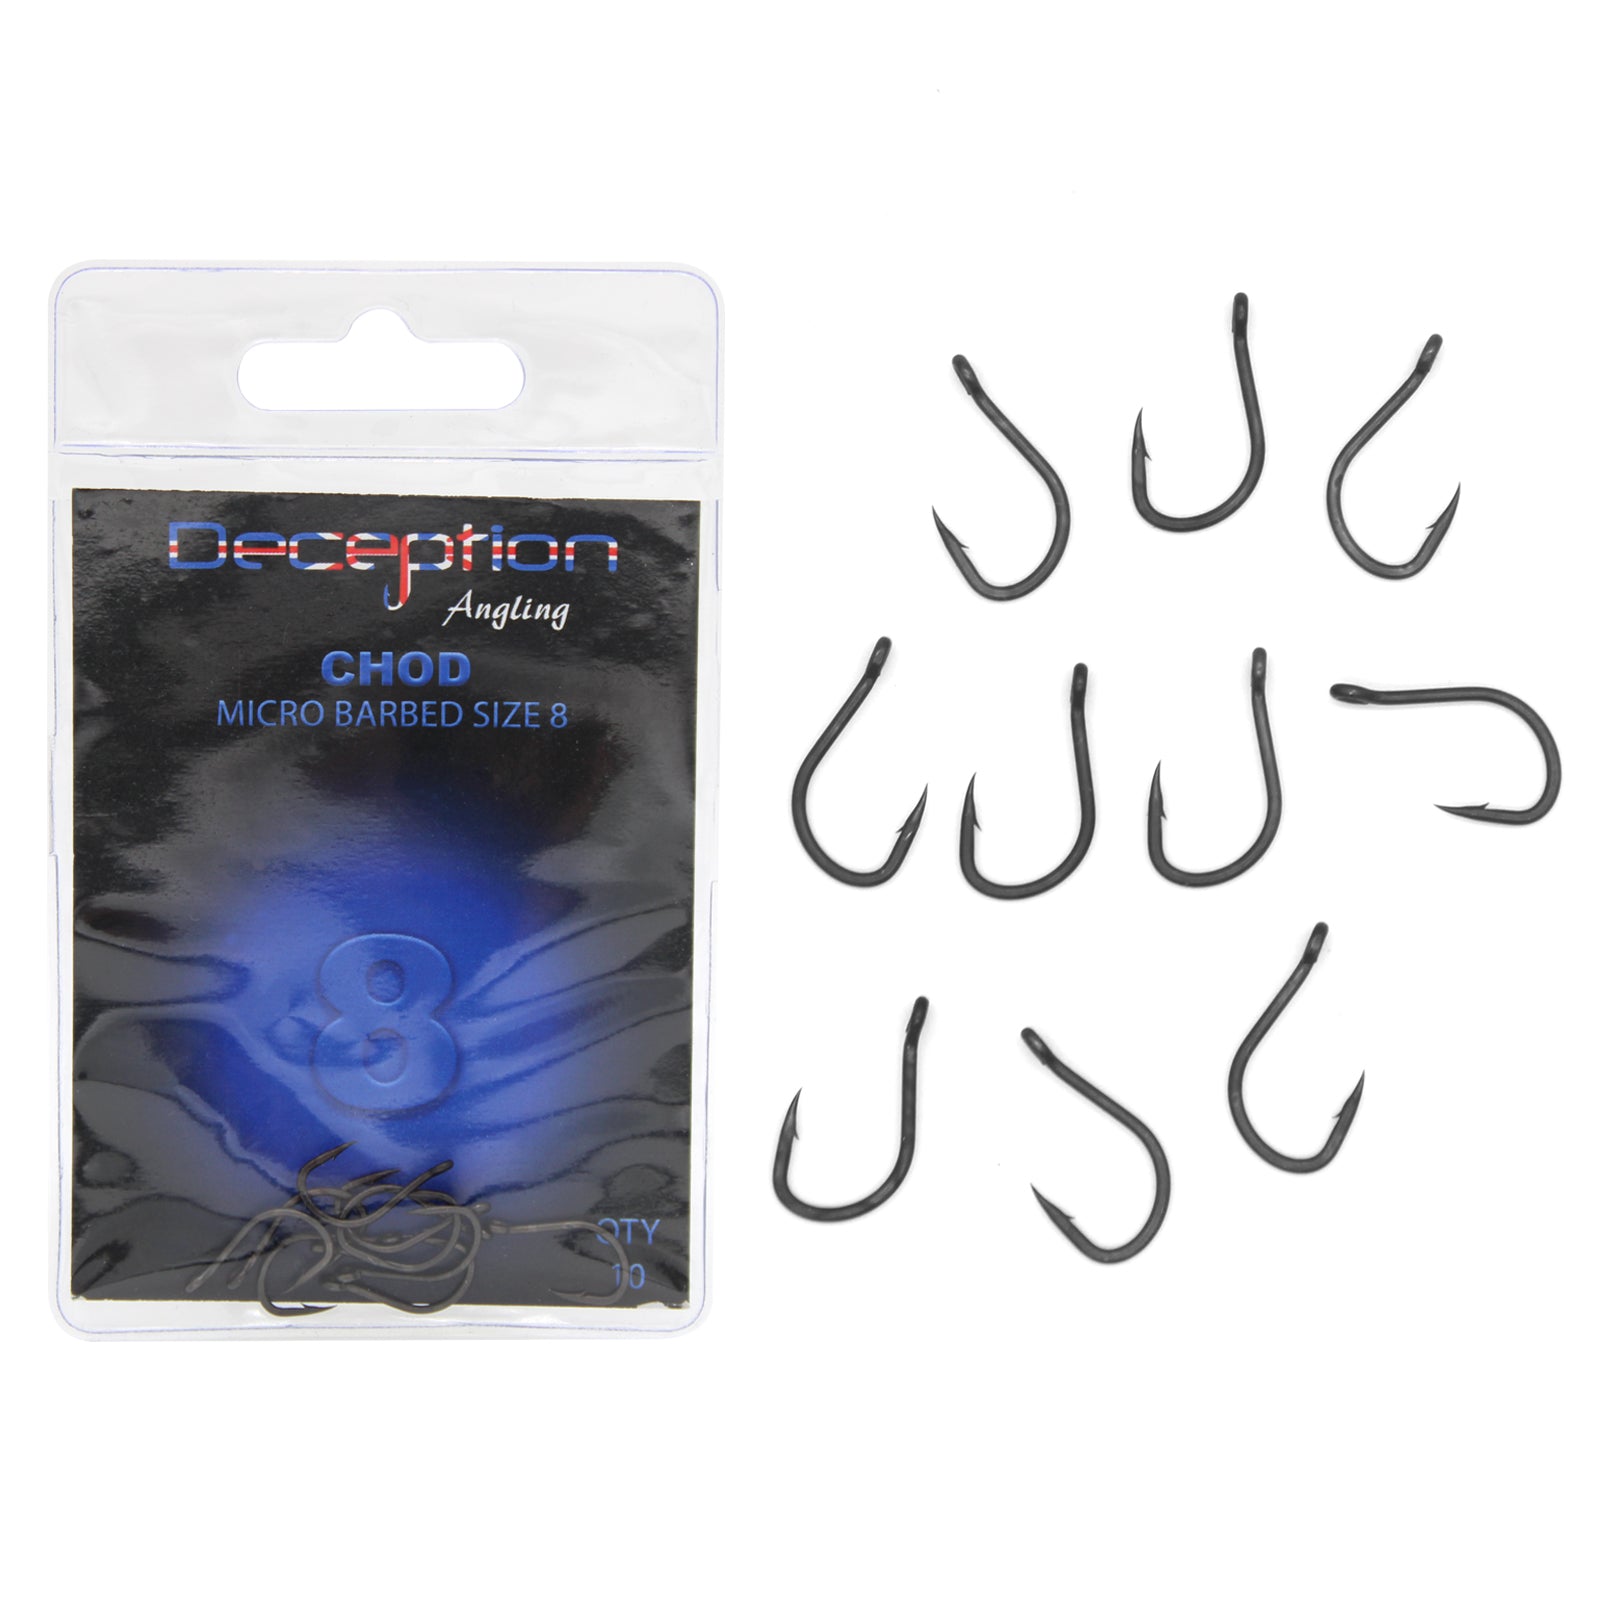 Deception Angling Chod Micro Barbed Fishing Hooks